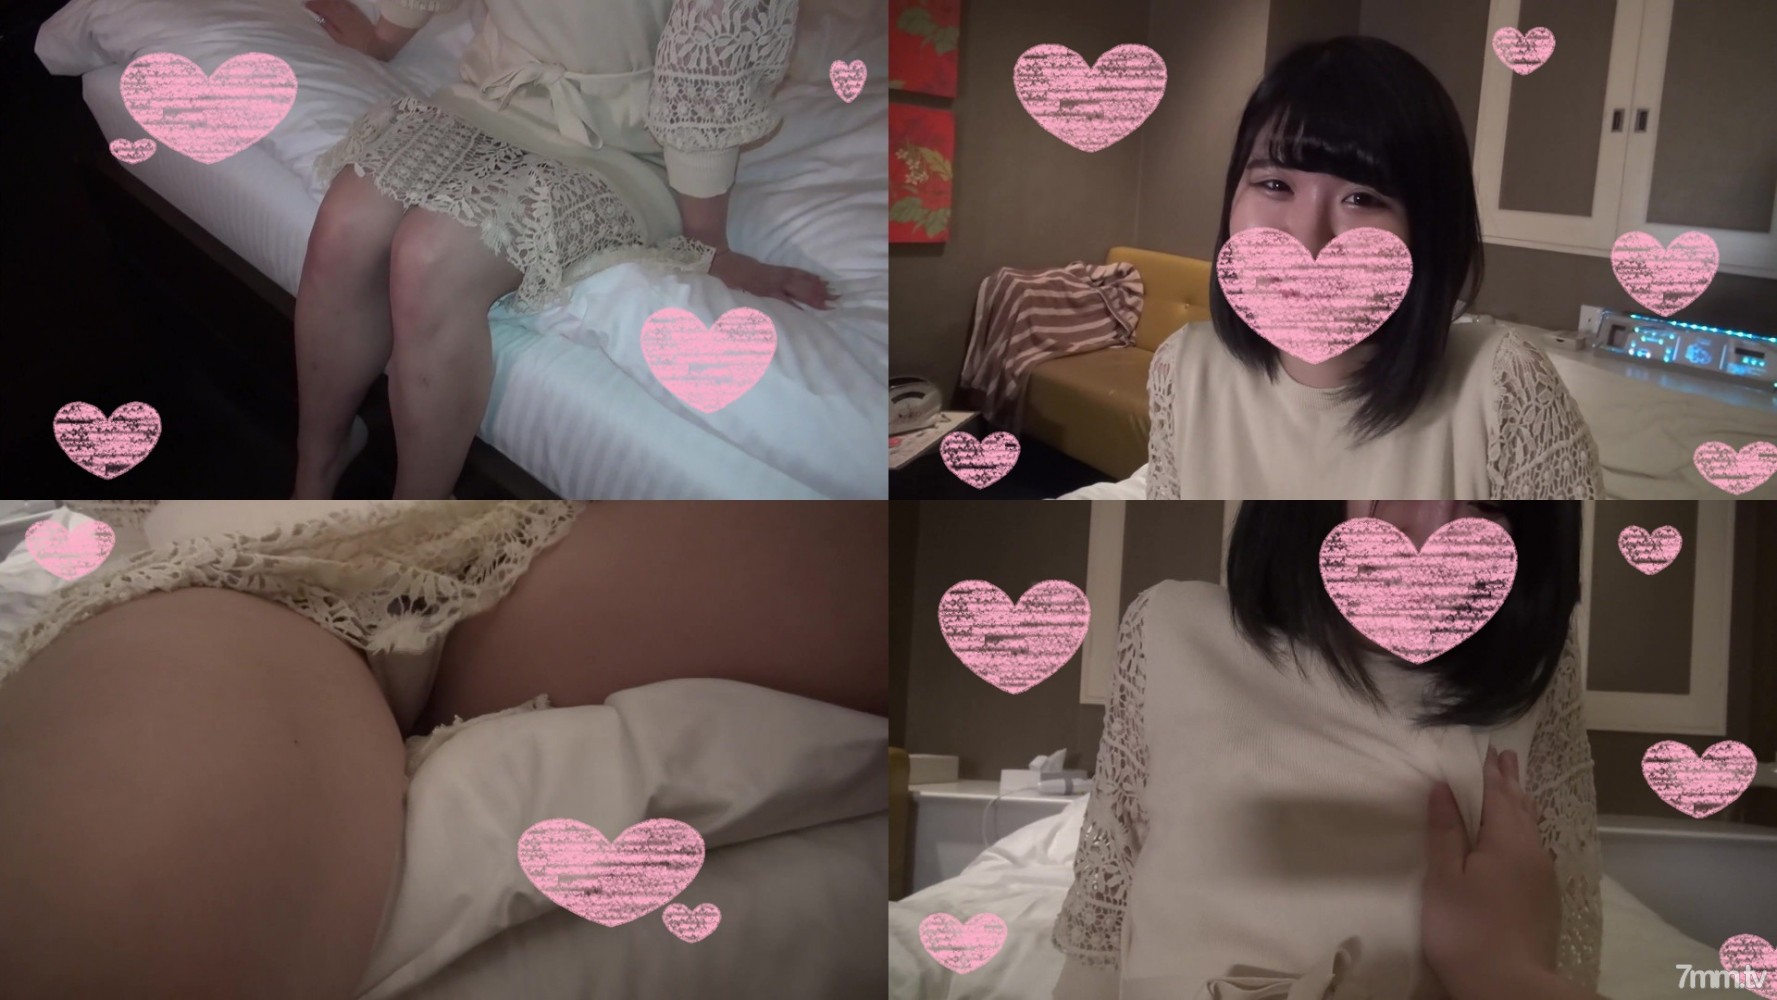 fc2-ppv 1353842 Actual Emergency Relief An Active Maid In Akihabara ❤️ Sexual Service ❤️ A Popular Girl From A Certain Live Billing App ❤️ Nipple Licking And Handjob Squirting Extremely Narrow Pussy